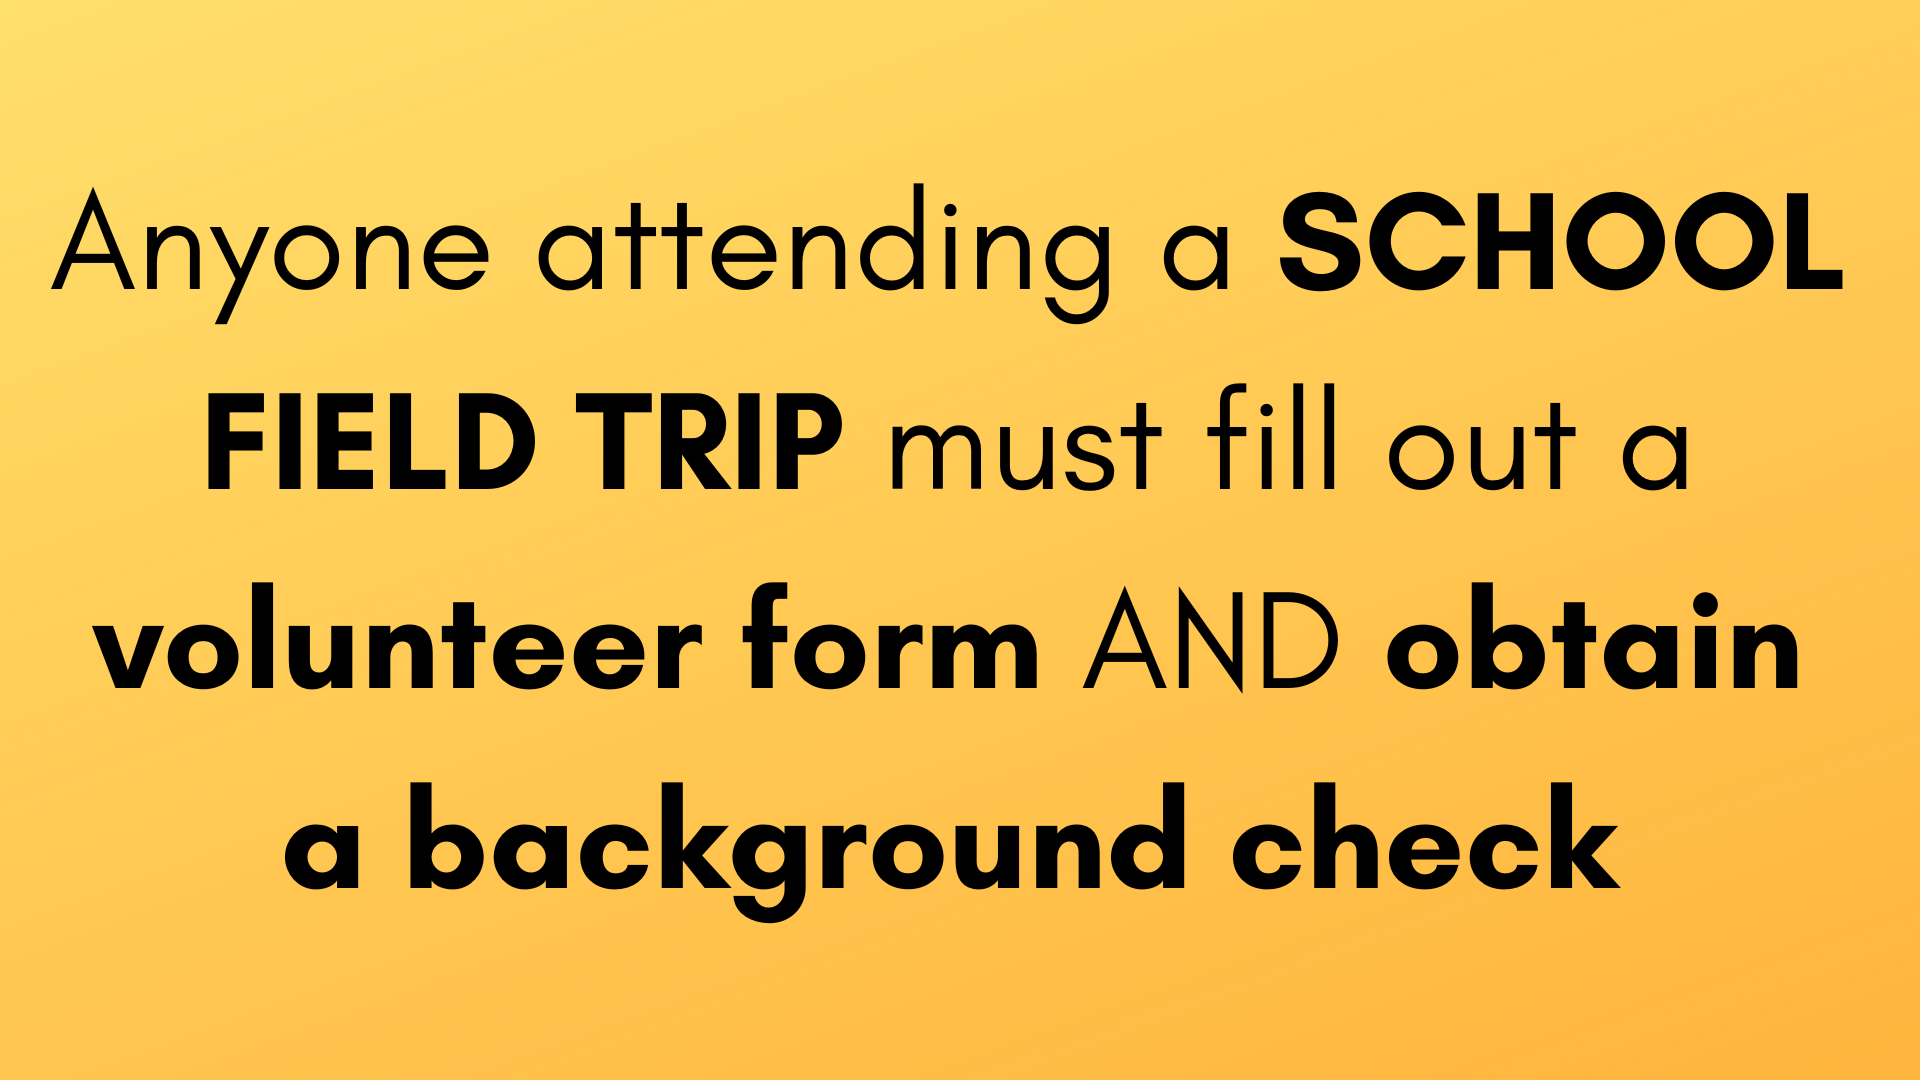 Anyone wishing to attend a field trip must fill out an application and obtain a background check